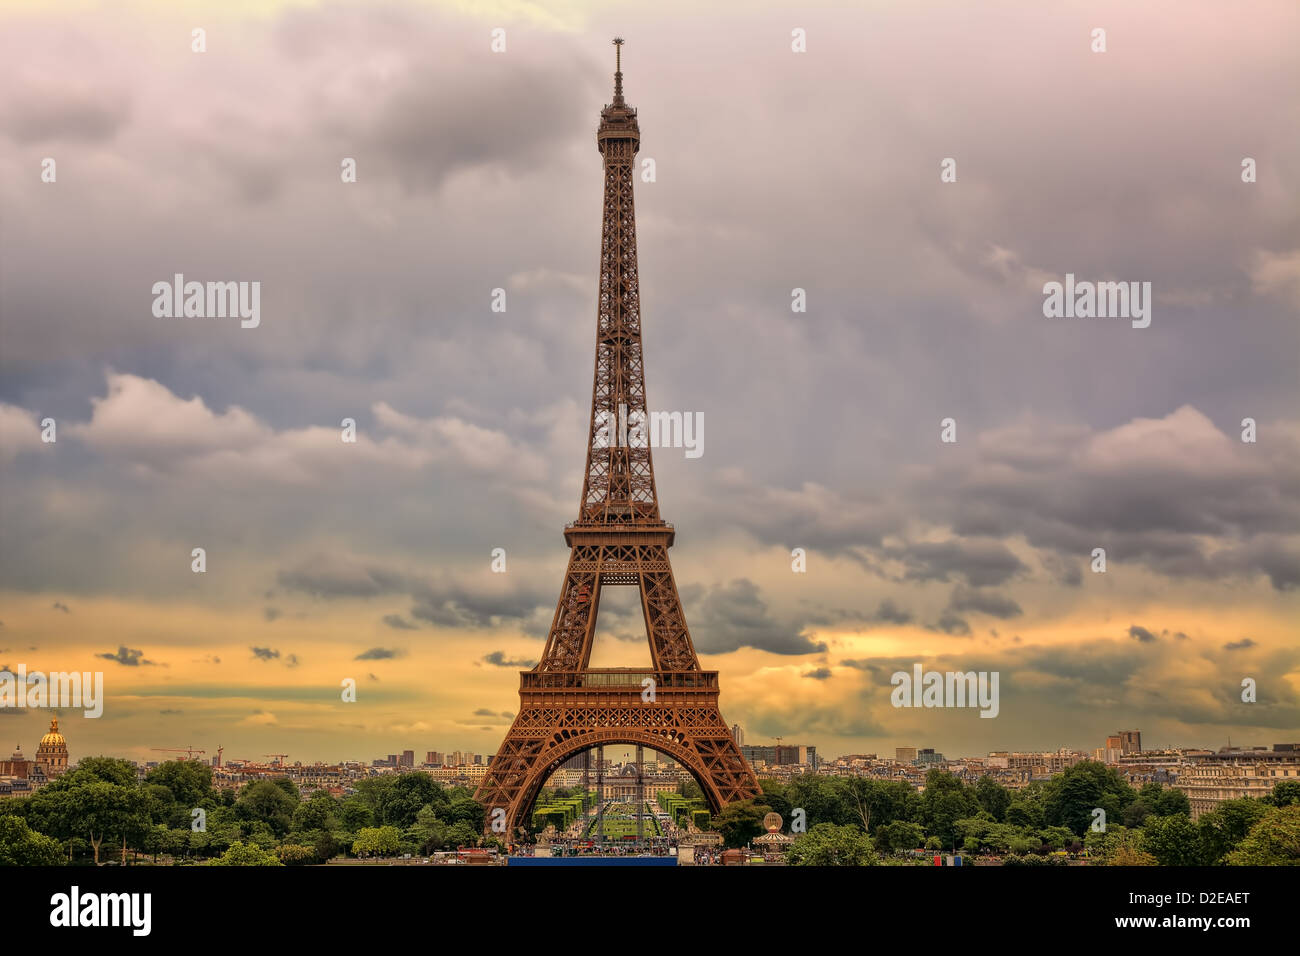 Famous Eiffel Tower under beautiful cloudy sky at sunset in Paris, France. Stock Photo